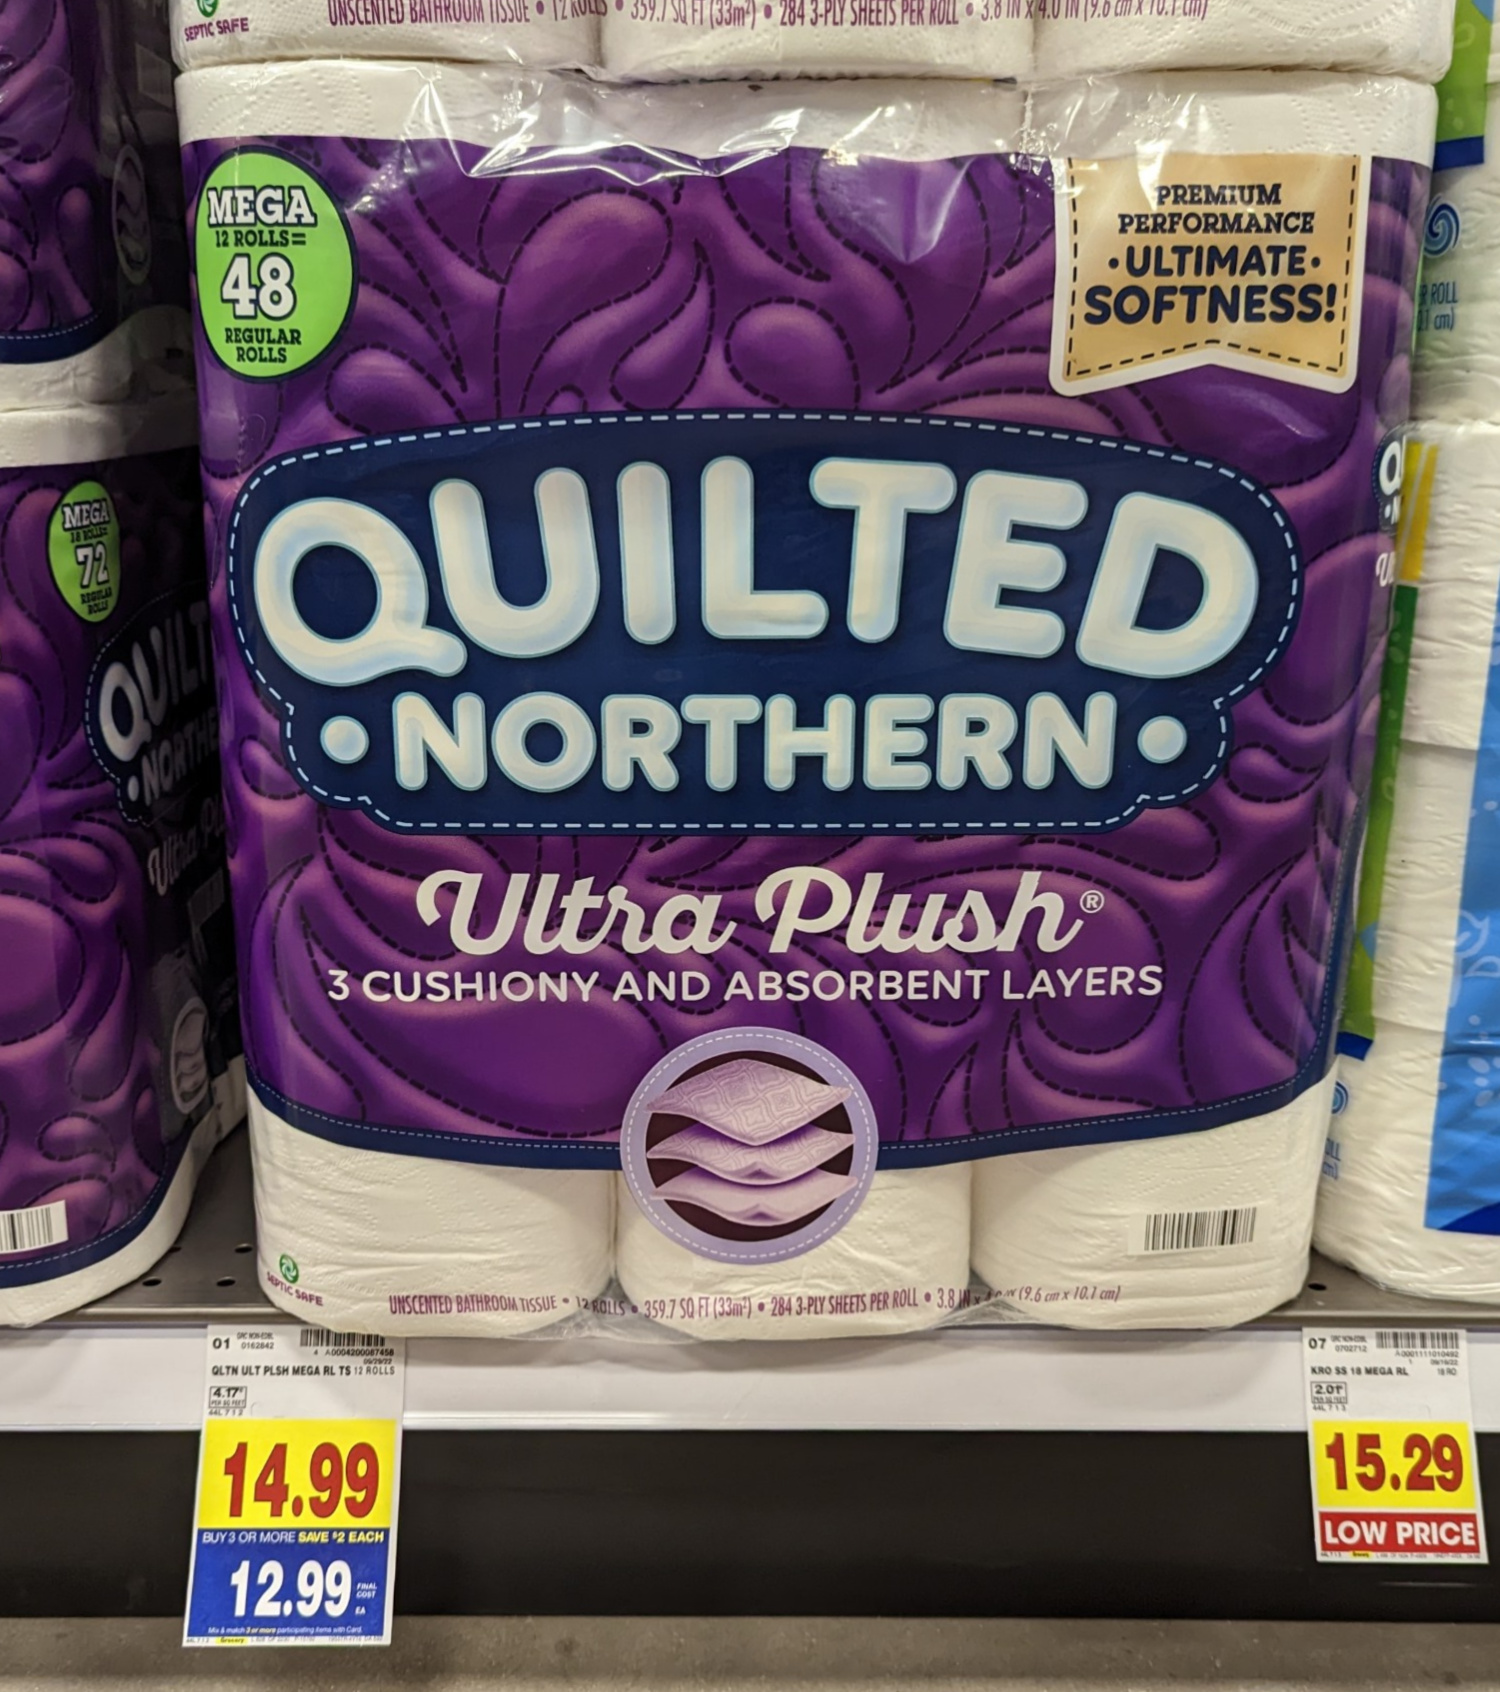 Quilted Northern Bathroom Tissue, Unscented, Mega Rolls, 2 Ply 4 Ea, Shop